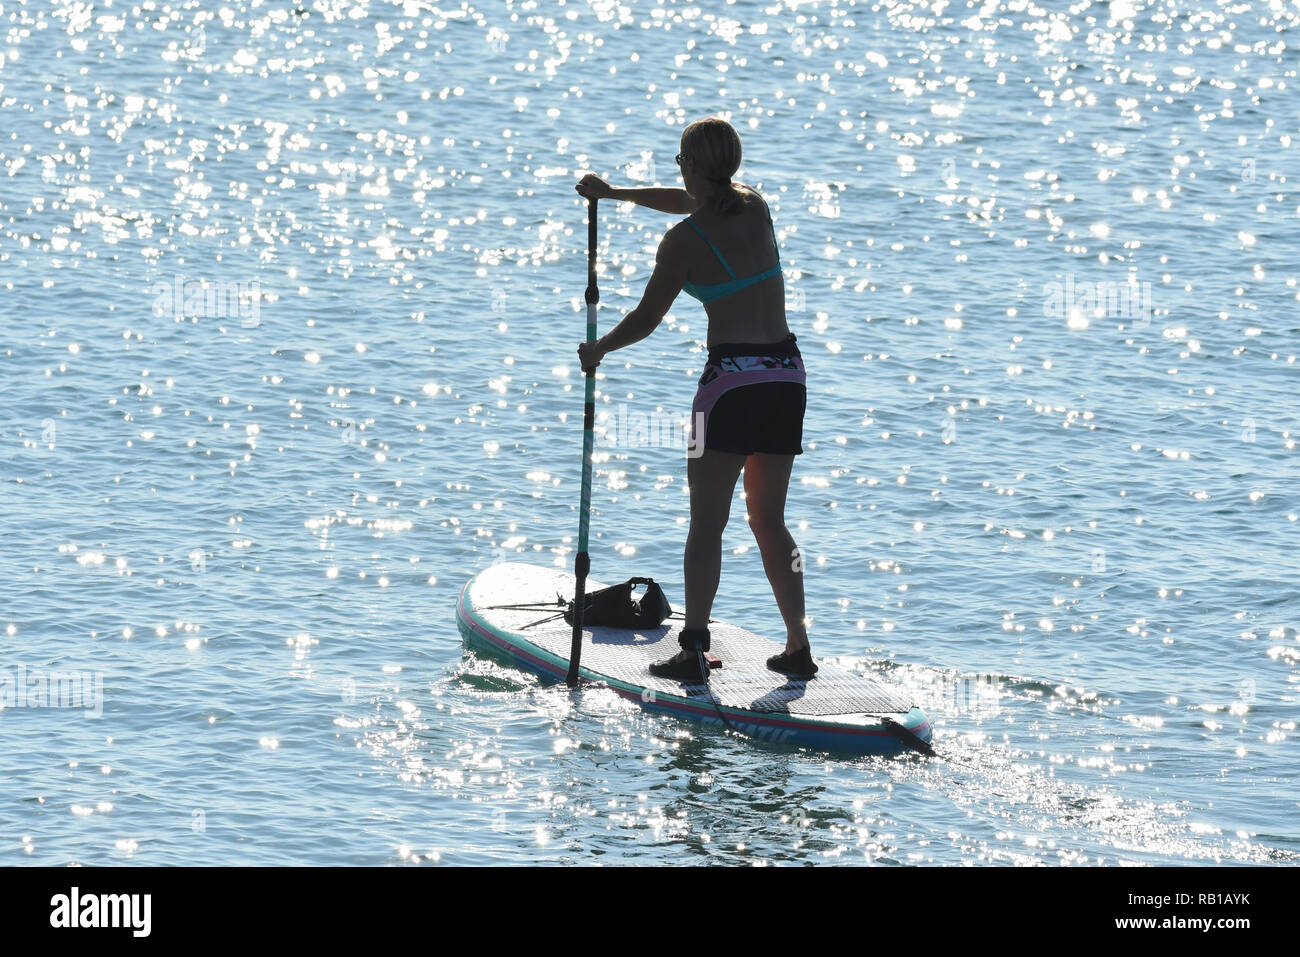 Pagaie simple boarder silhouette sur la mer. Paddleboarder paddle. Banque D'Images